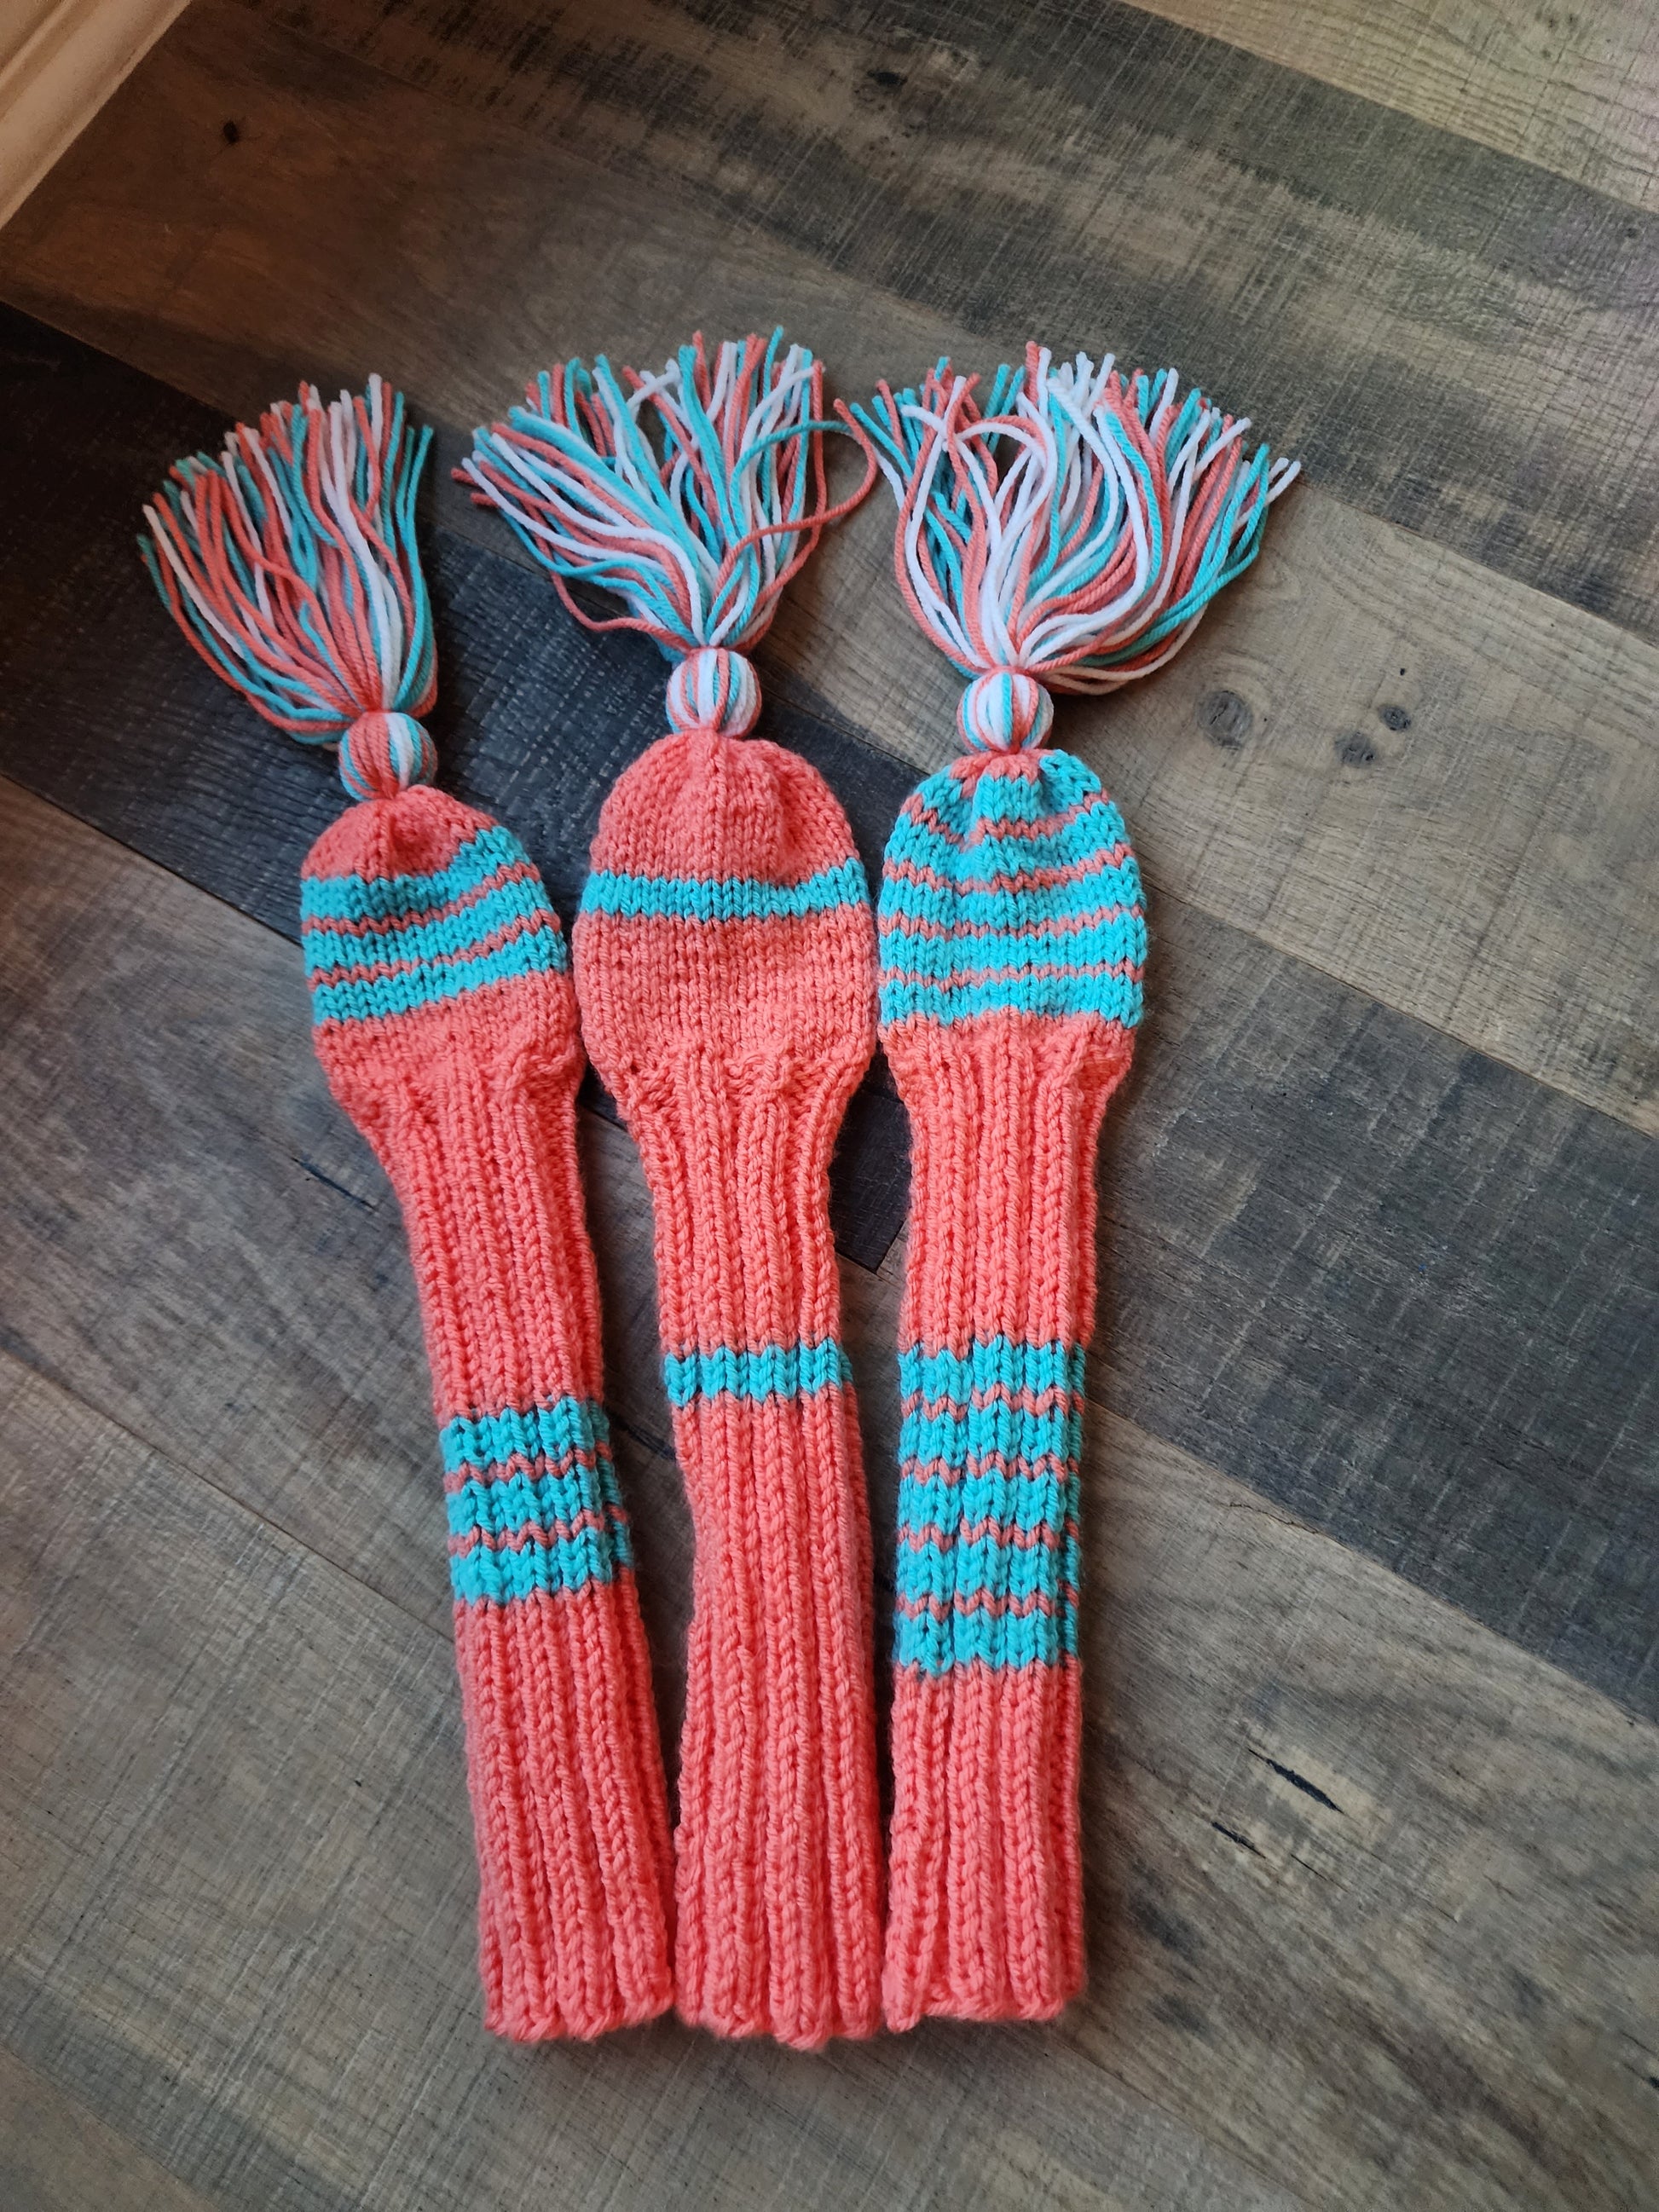 Three Golf Club Head Covers Retro-Vintage Orange, Blue & White with Tassels for Drivers, Woods - Austinknittylimits